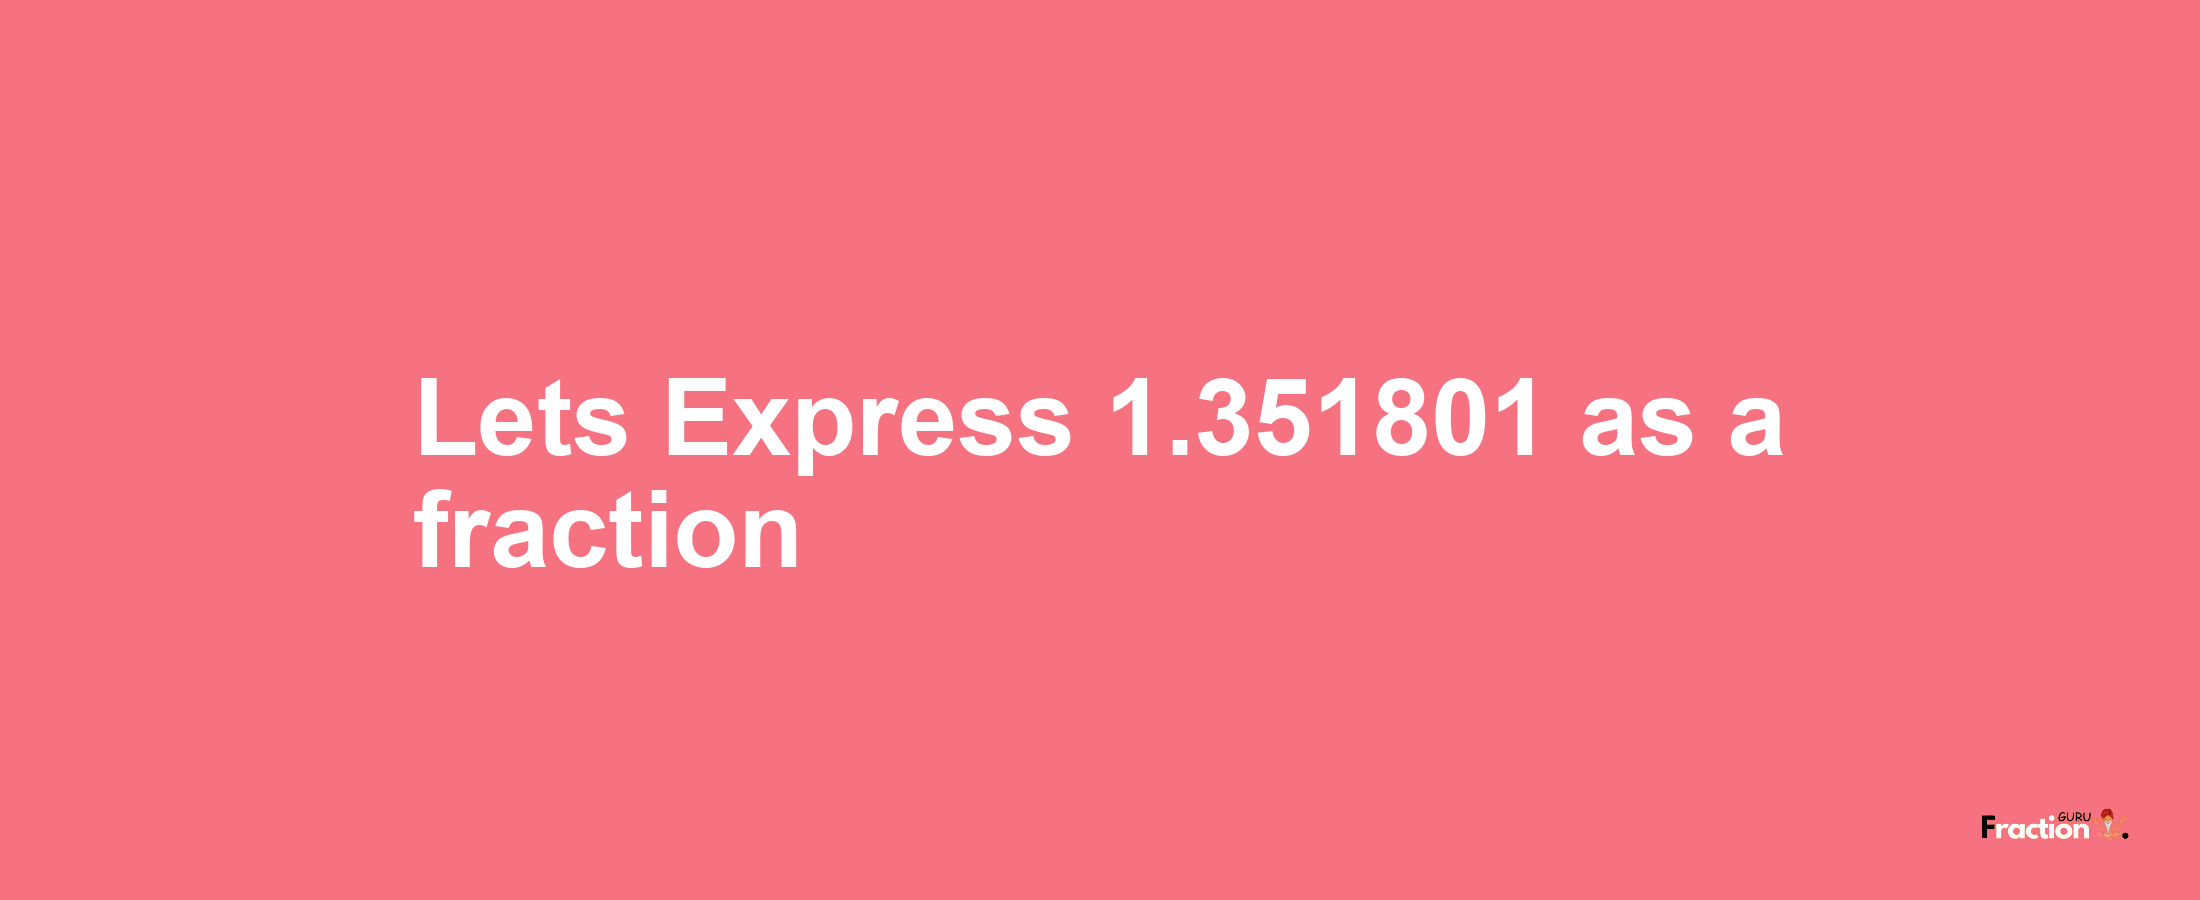 Lets Express 1.351801 as afraction